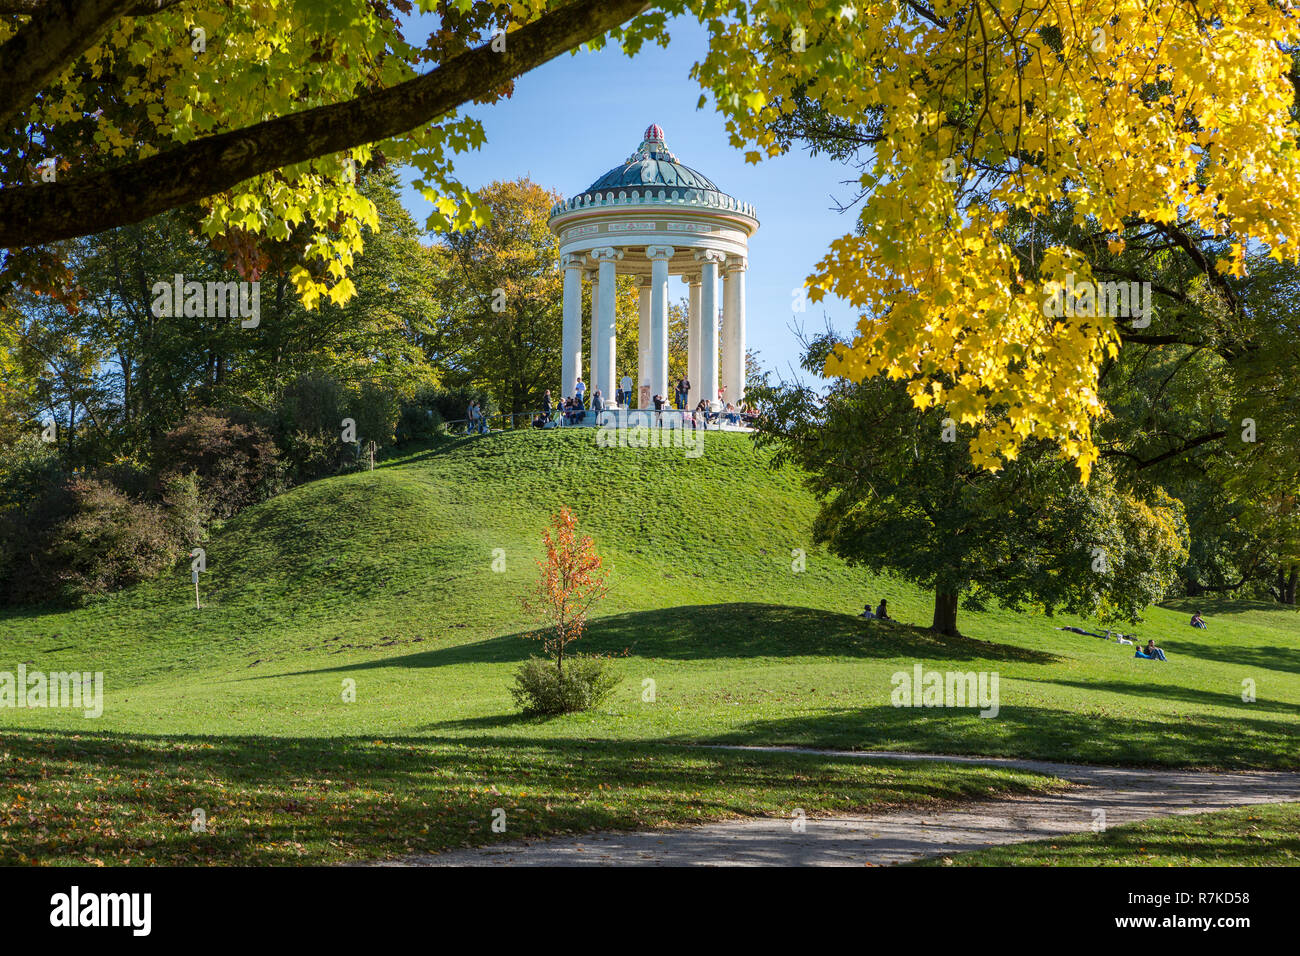 MUNICH, GERMANY - OCTOBER 11, 2017: Monopteros building in the English Garden in Munich in autumn. People sitting at the base of the building. Stock Photo